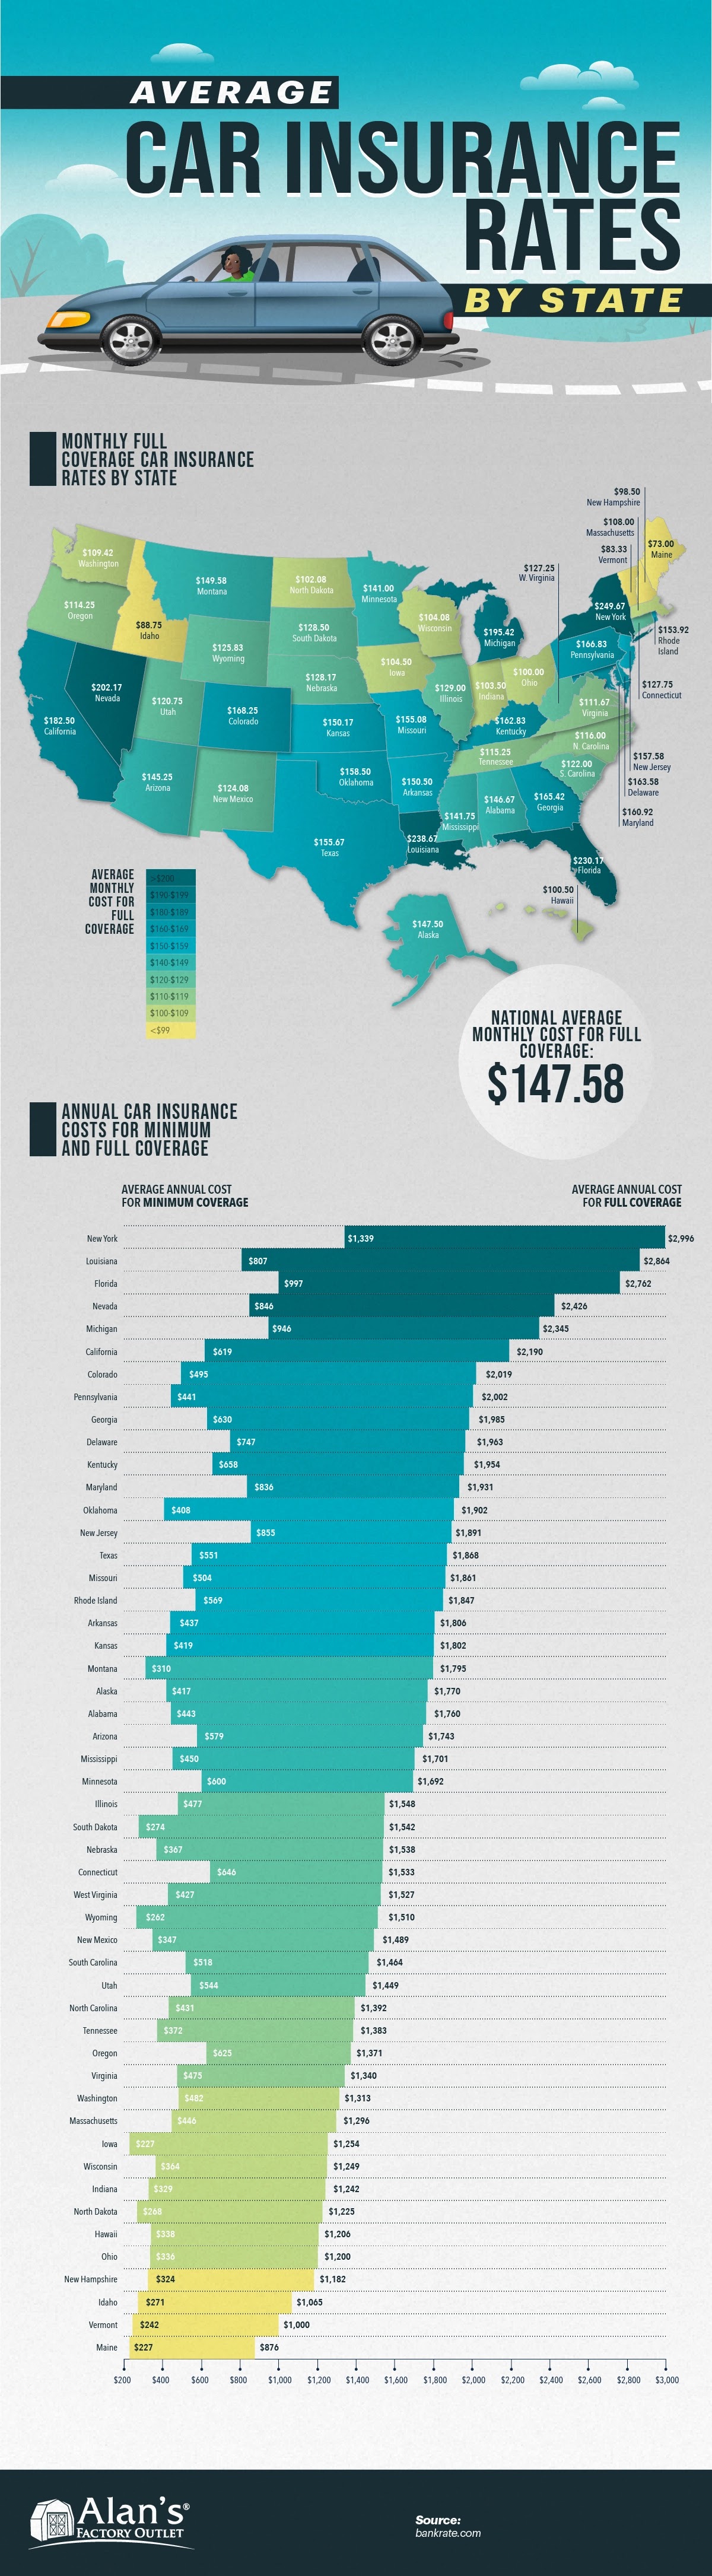  Average Car Insurance Rates by State #Infographic